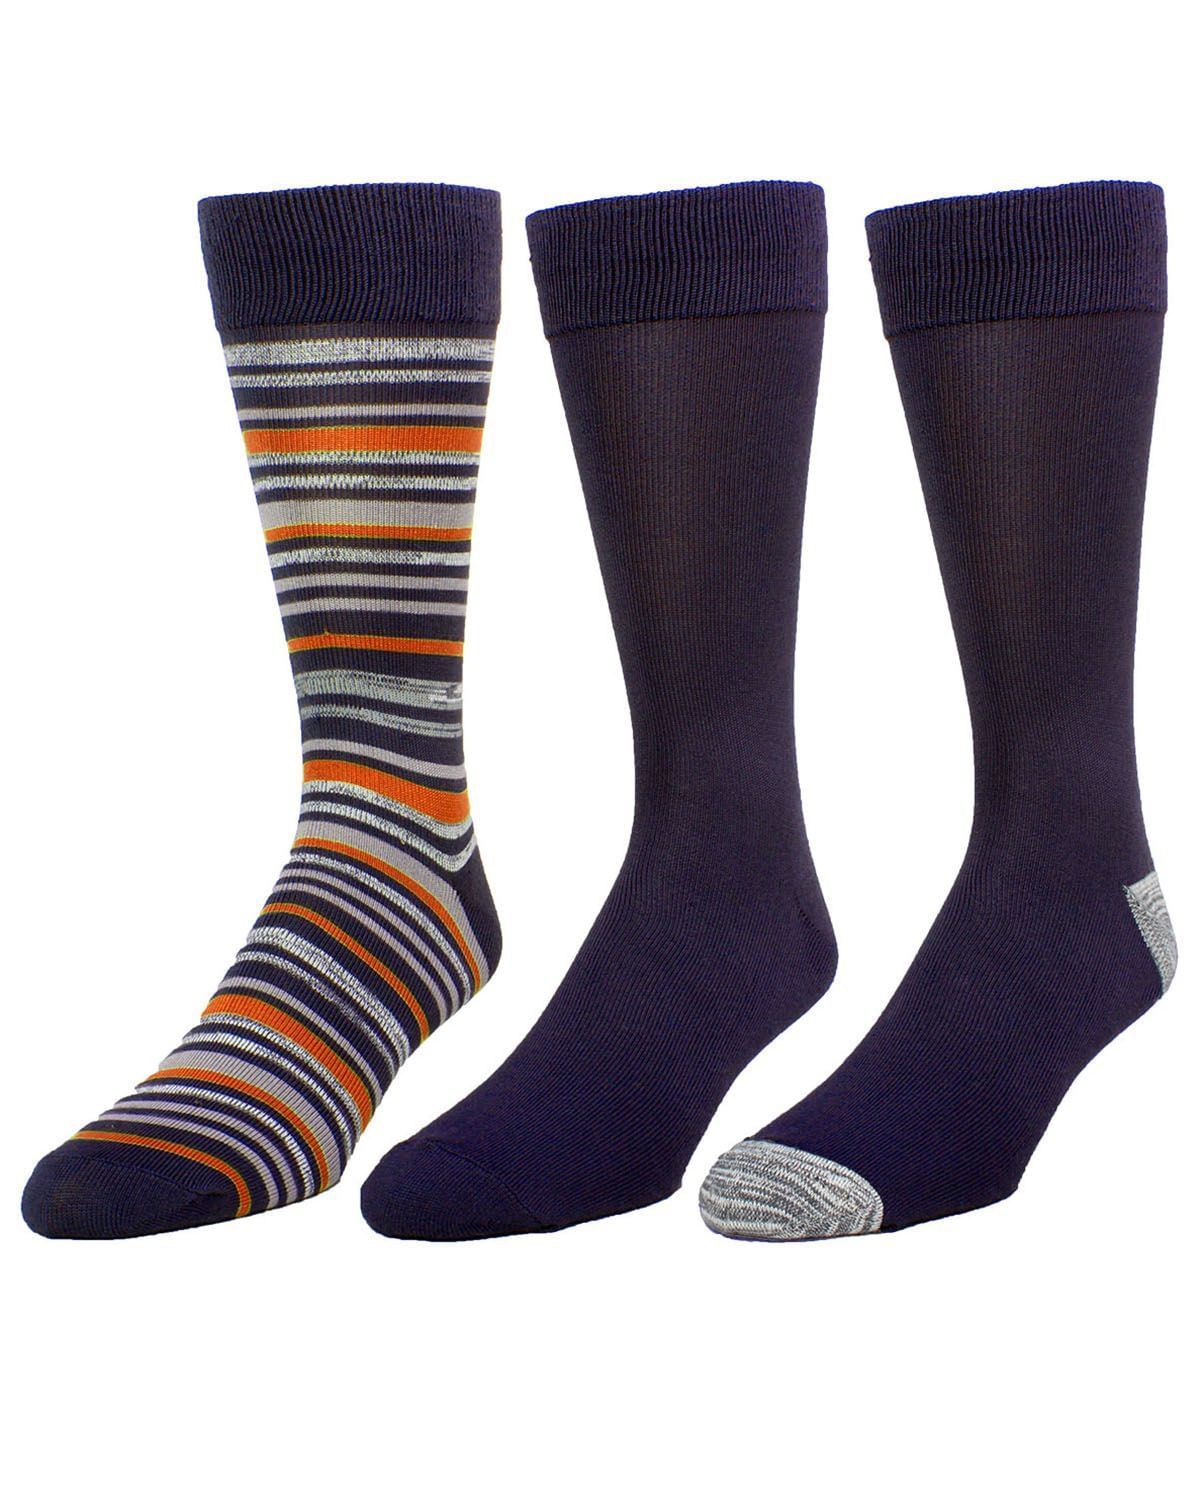 Rep Stripe Buttersoft Men's Crew 3 Pair Pack